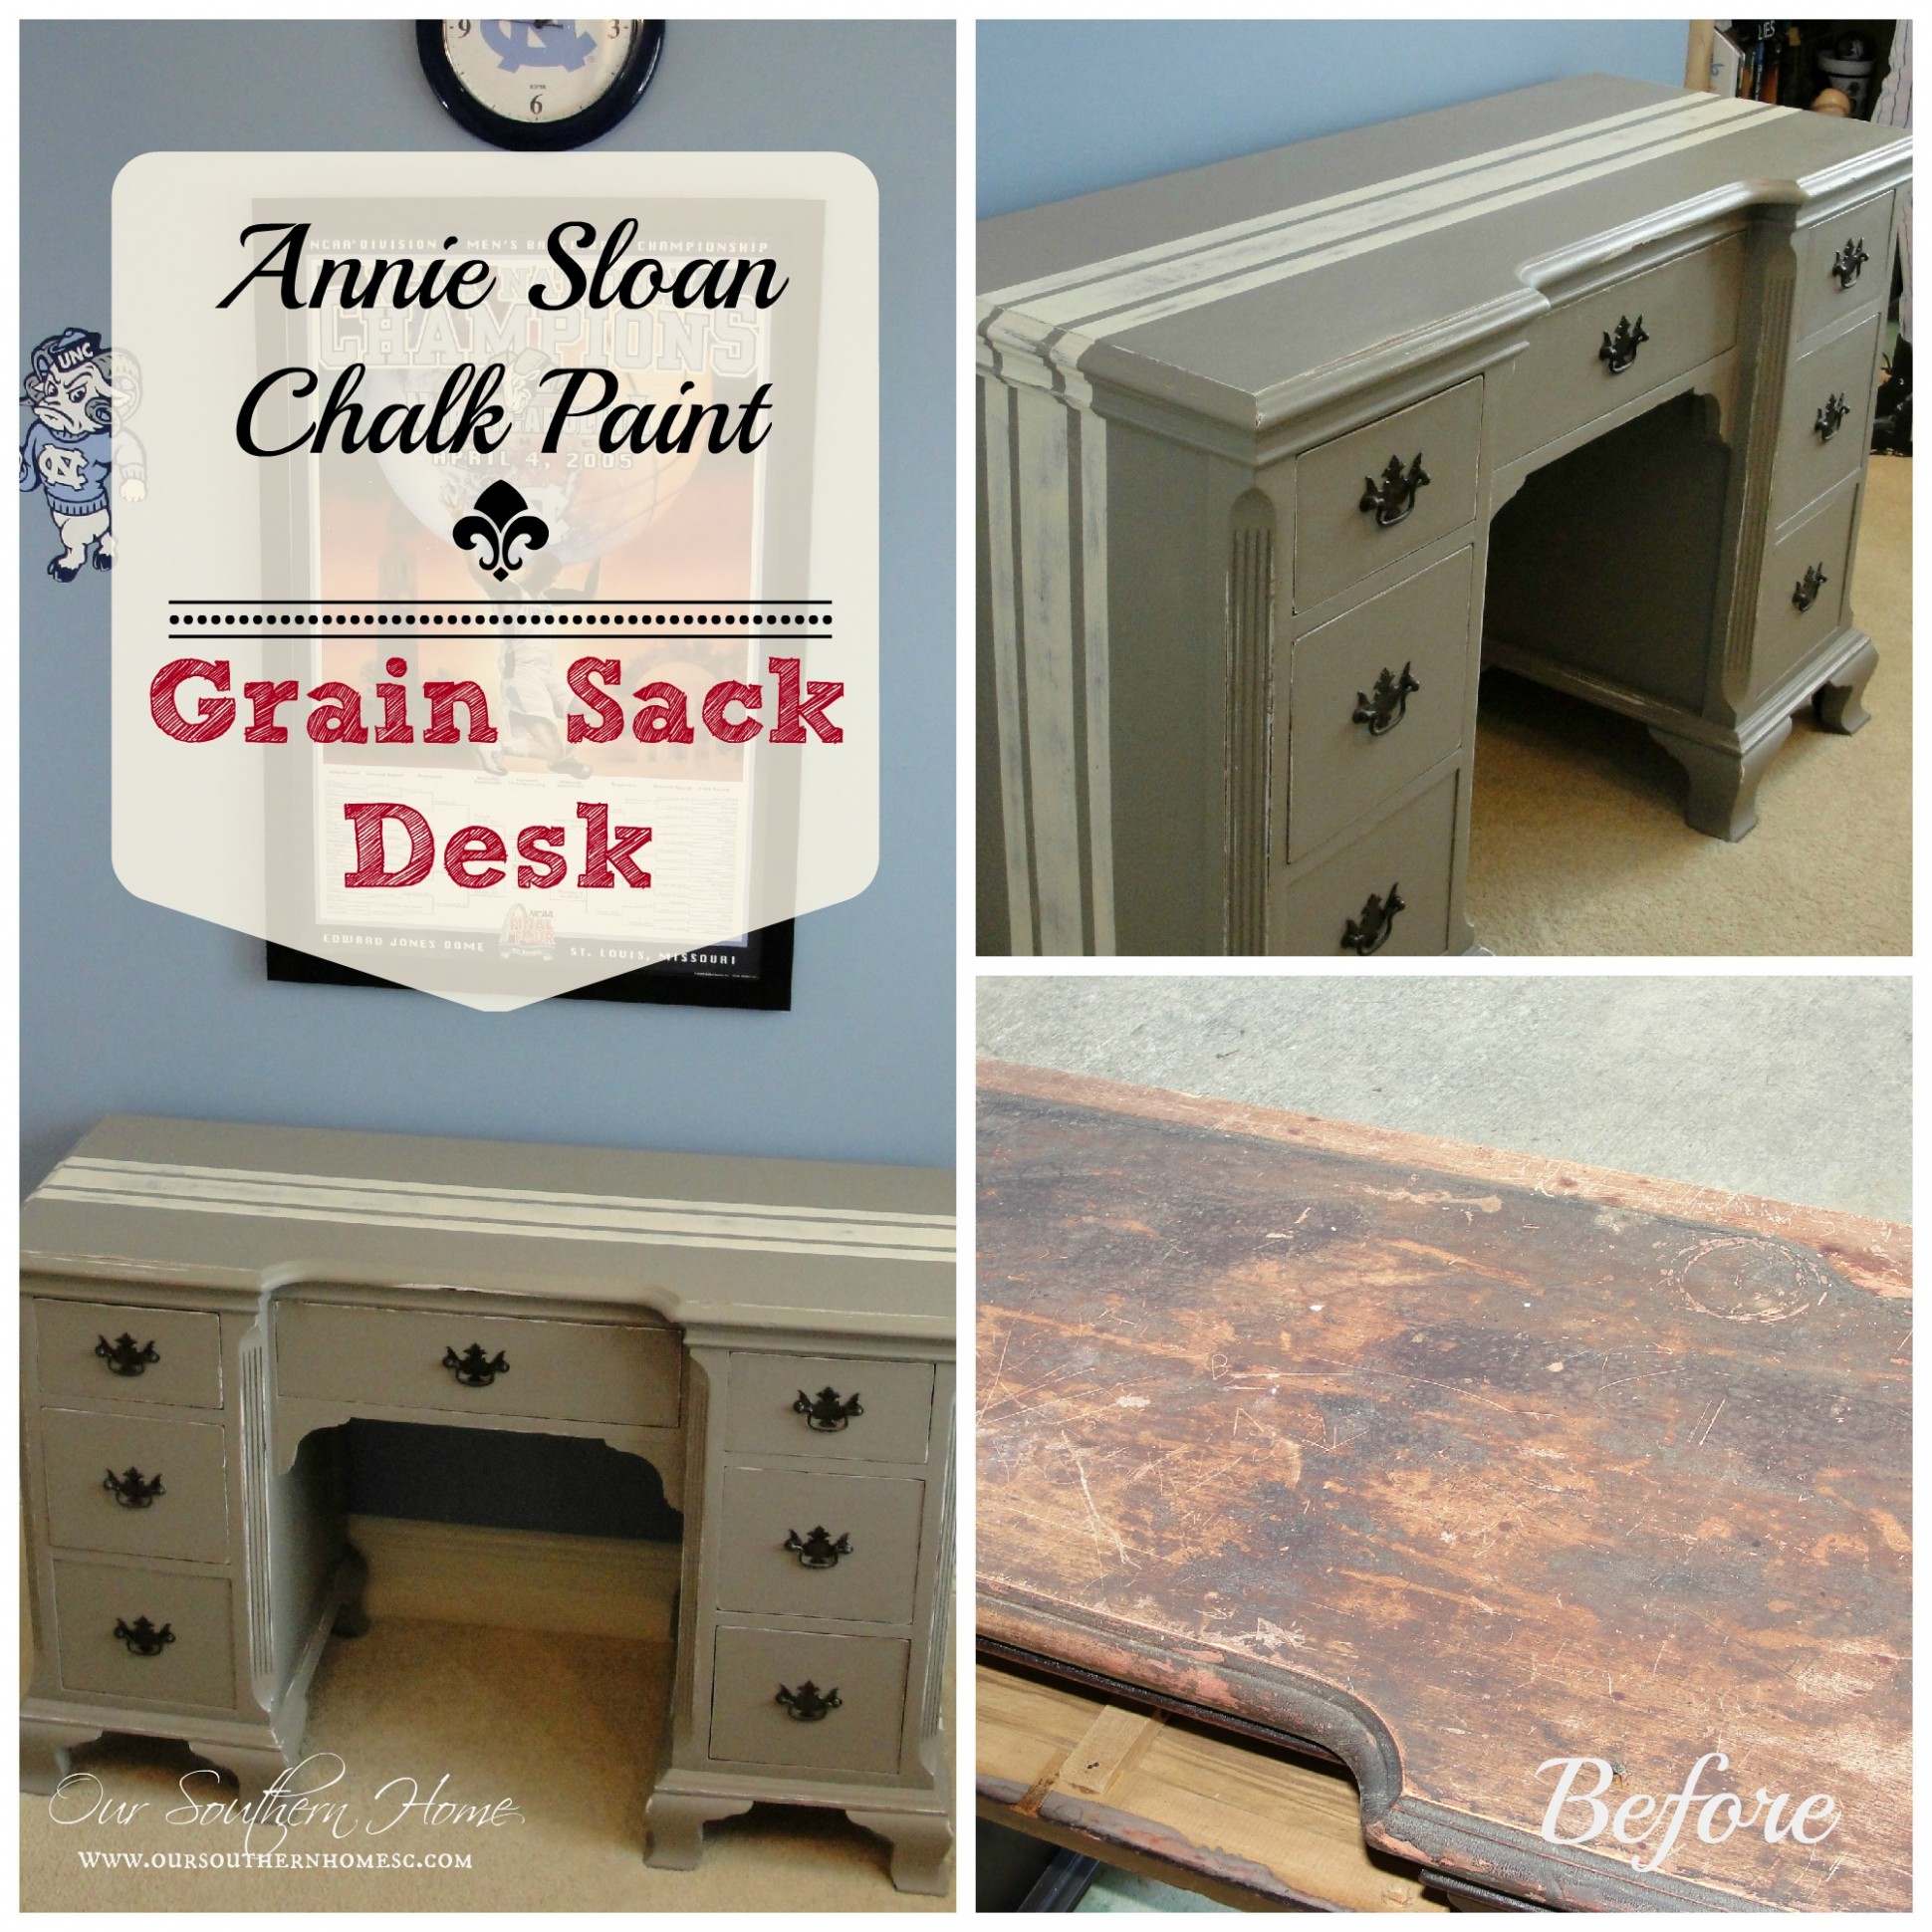 Grain Sack Desk Annie Sloan Chalk Paint Our Southern Home Where To Purchase Annie Sloan Chalk Paint Online